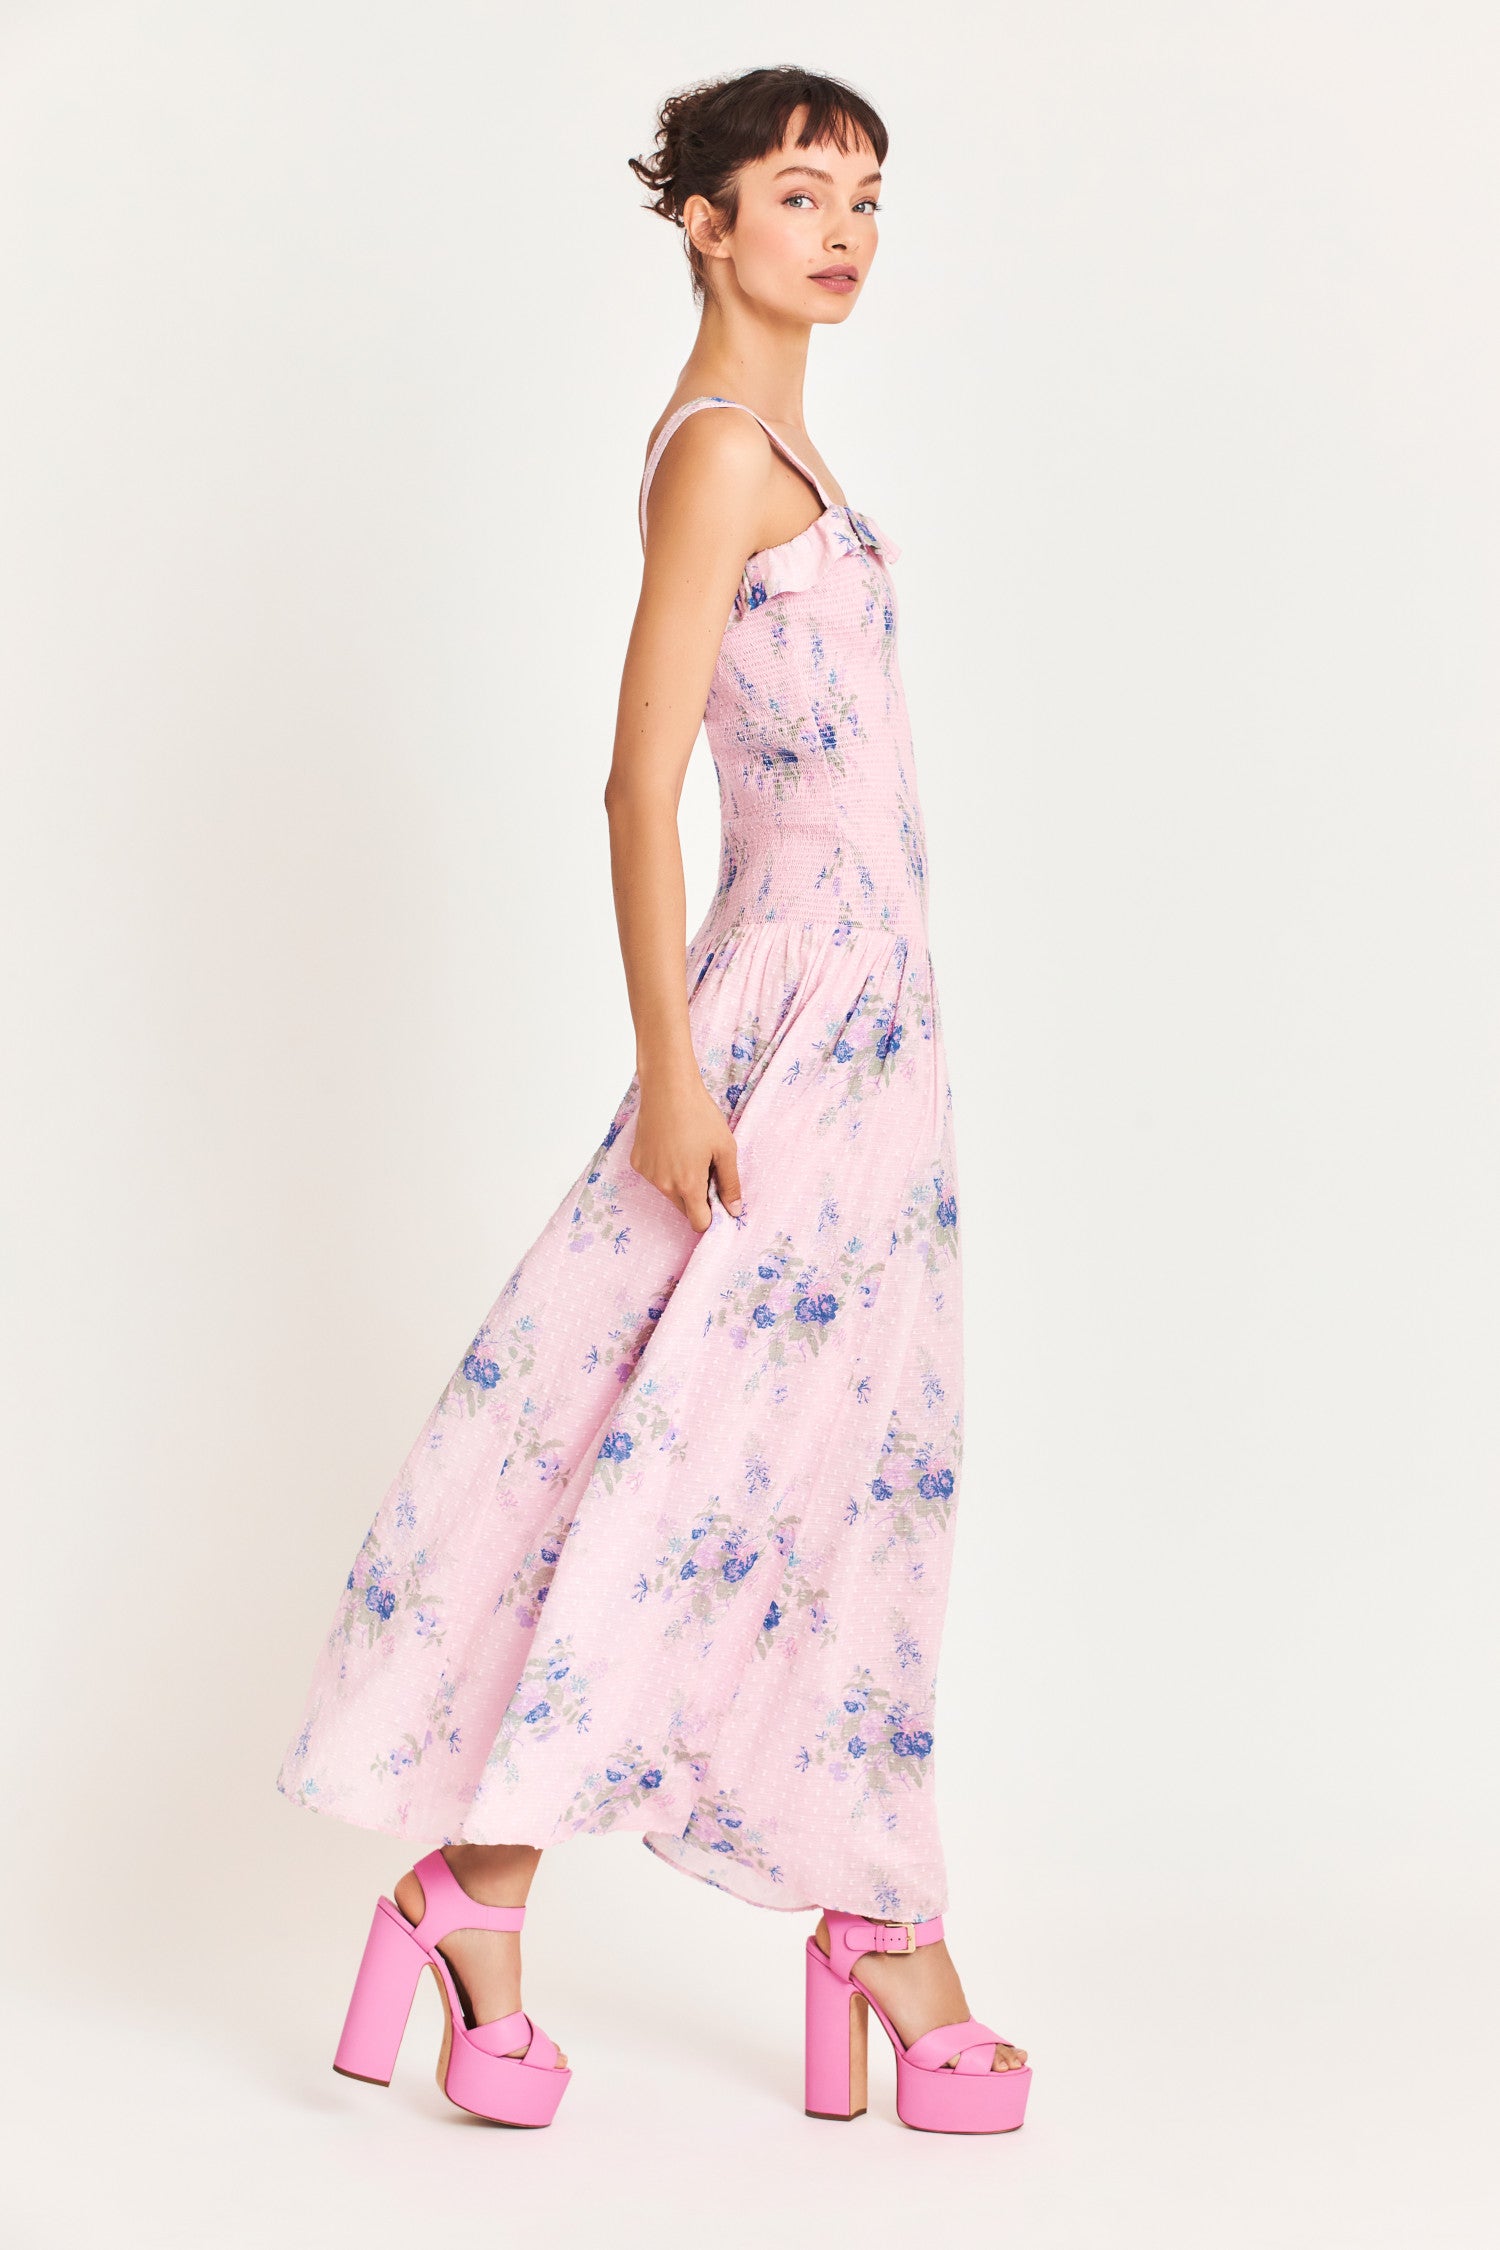  Pink Maxi dress with a blue heirloom bouquet print on a soft textured dot cotton fabric and a smocked bodice that releases into a sweeping A-line skirt. 